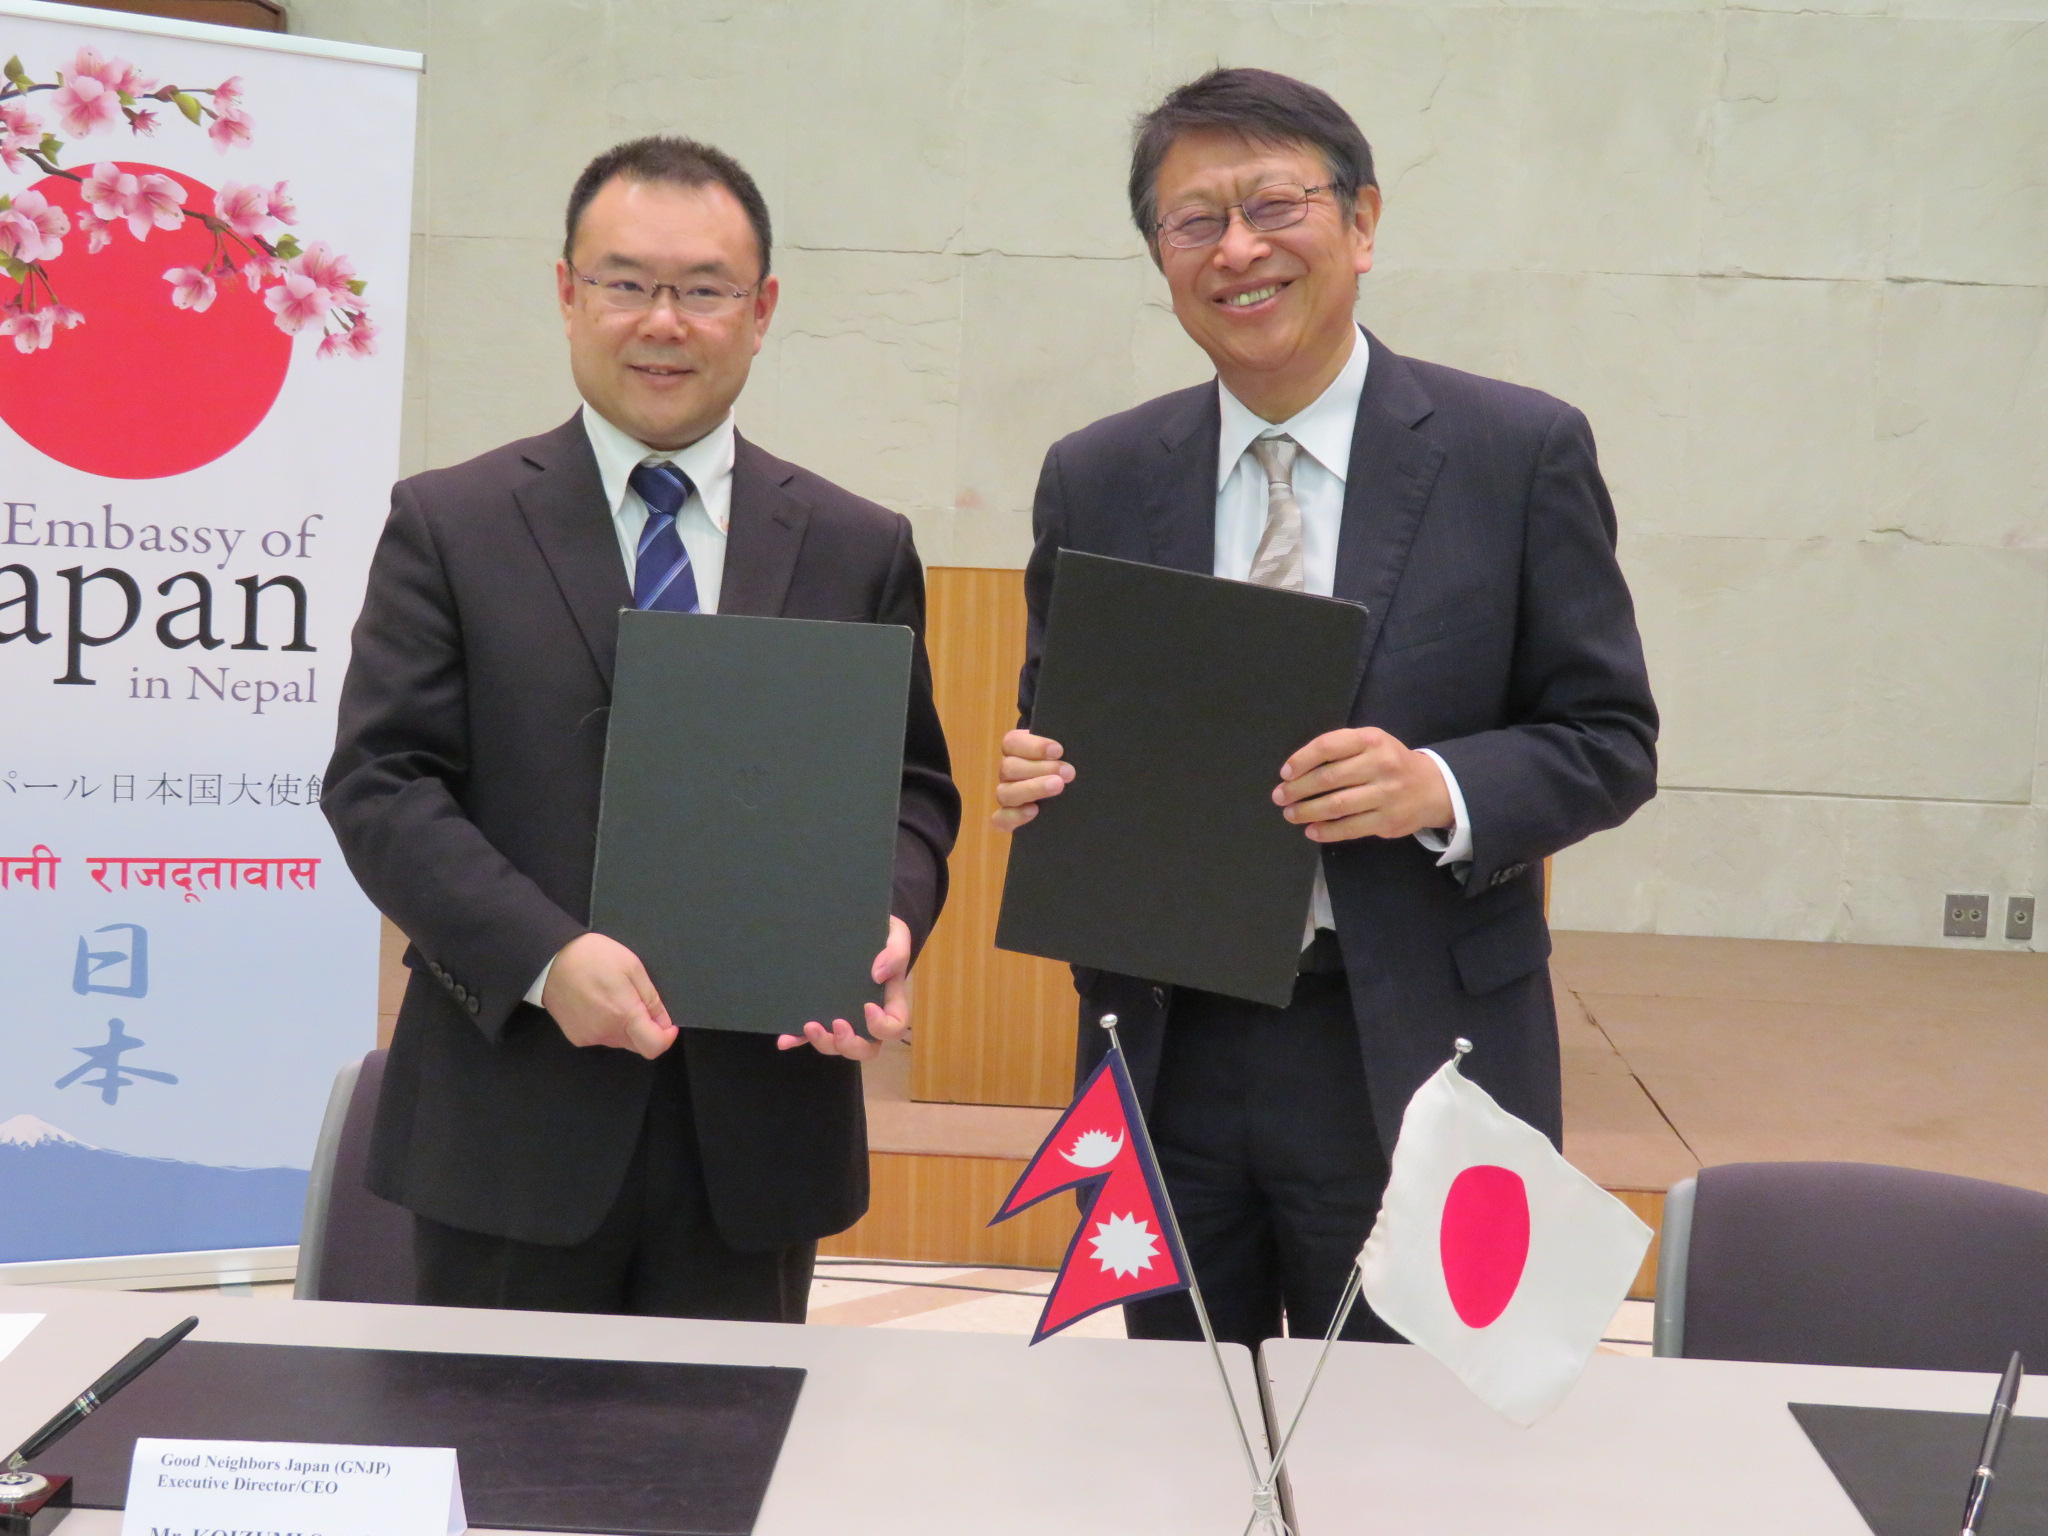 Japan provides support water and sanitation facilities for schools